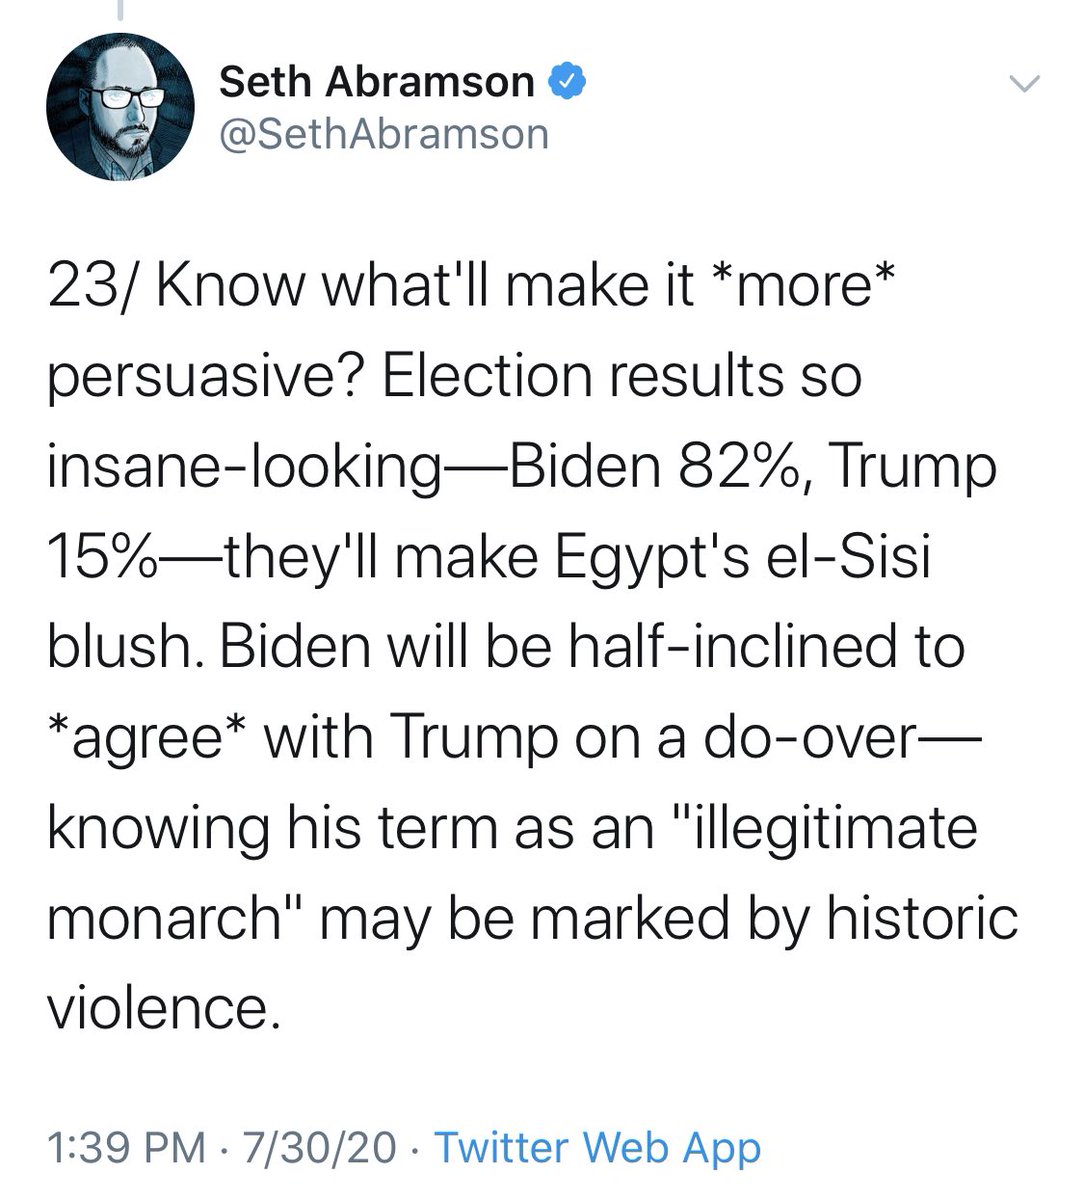 To hear you tell it, all Biden would have to do is agree to it  https://twitter.com/sethabramson/status/1289253608492392448